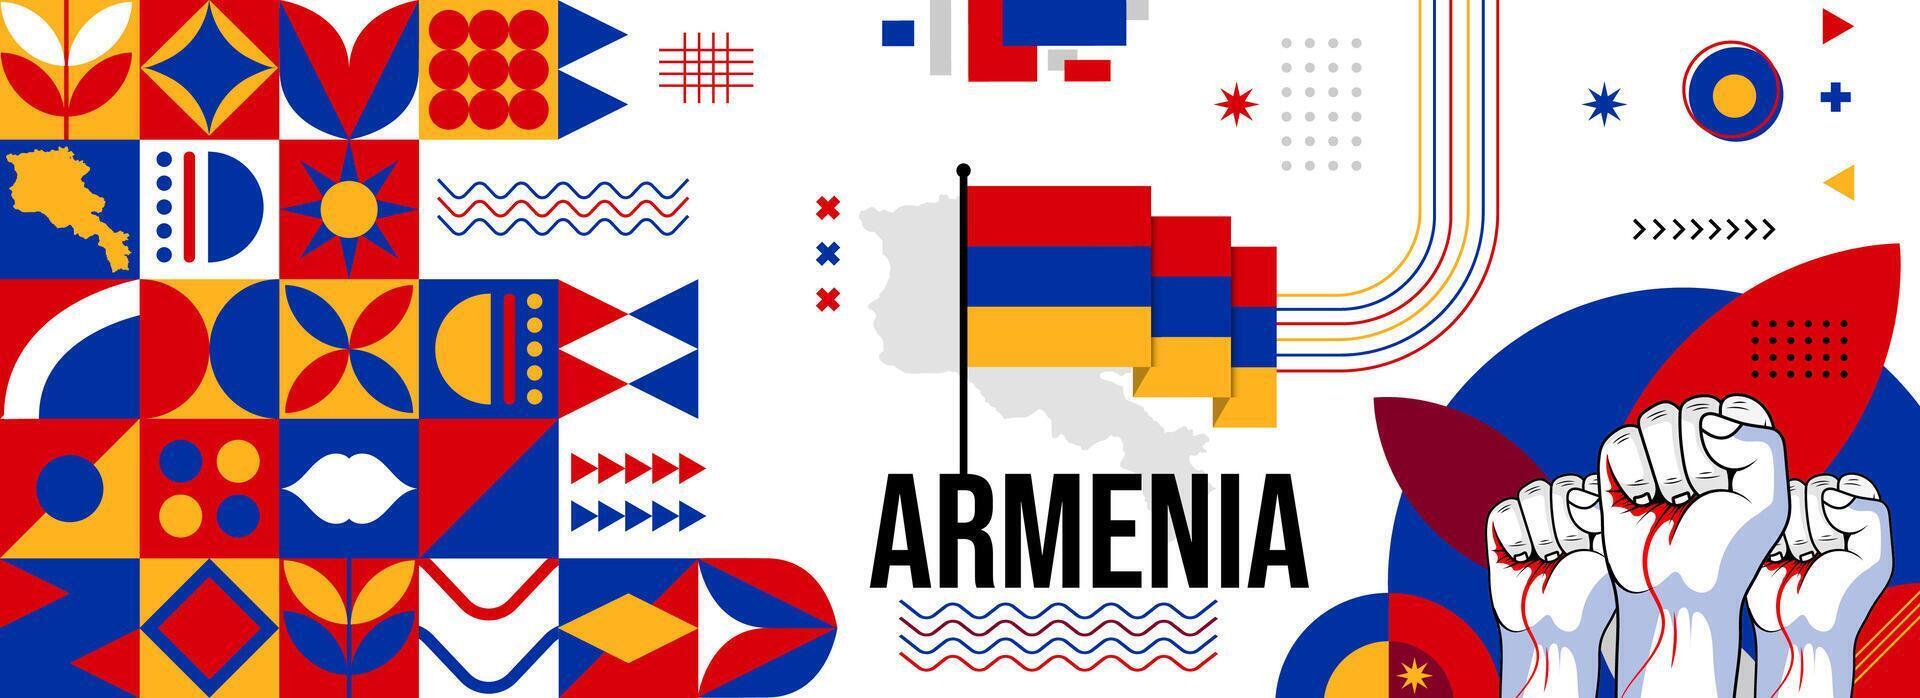 Armenia national or independence day banner for country celebration. Flag and map of Armenia with raised fists. Modern retro design with typorgaphy abstract geometric icons. Vector illustration